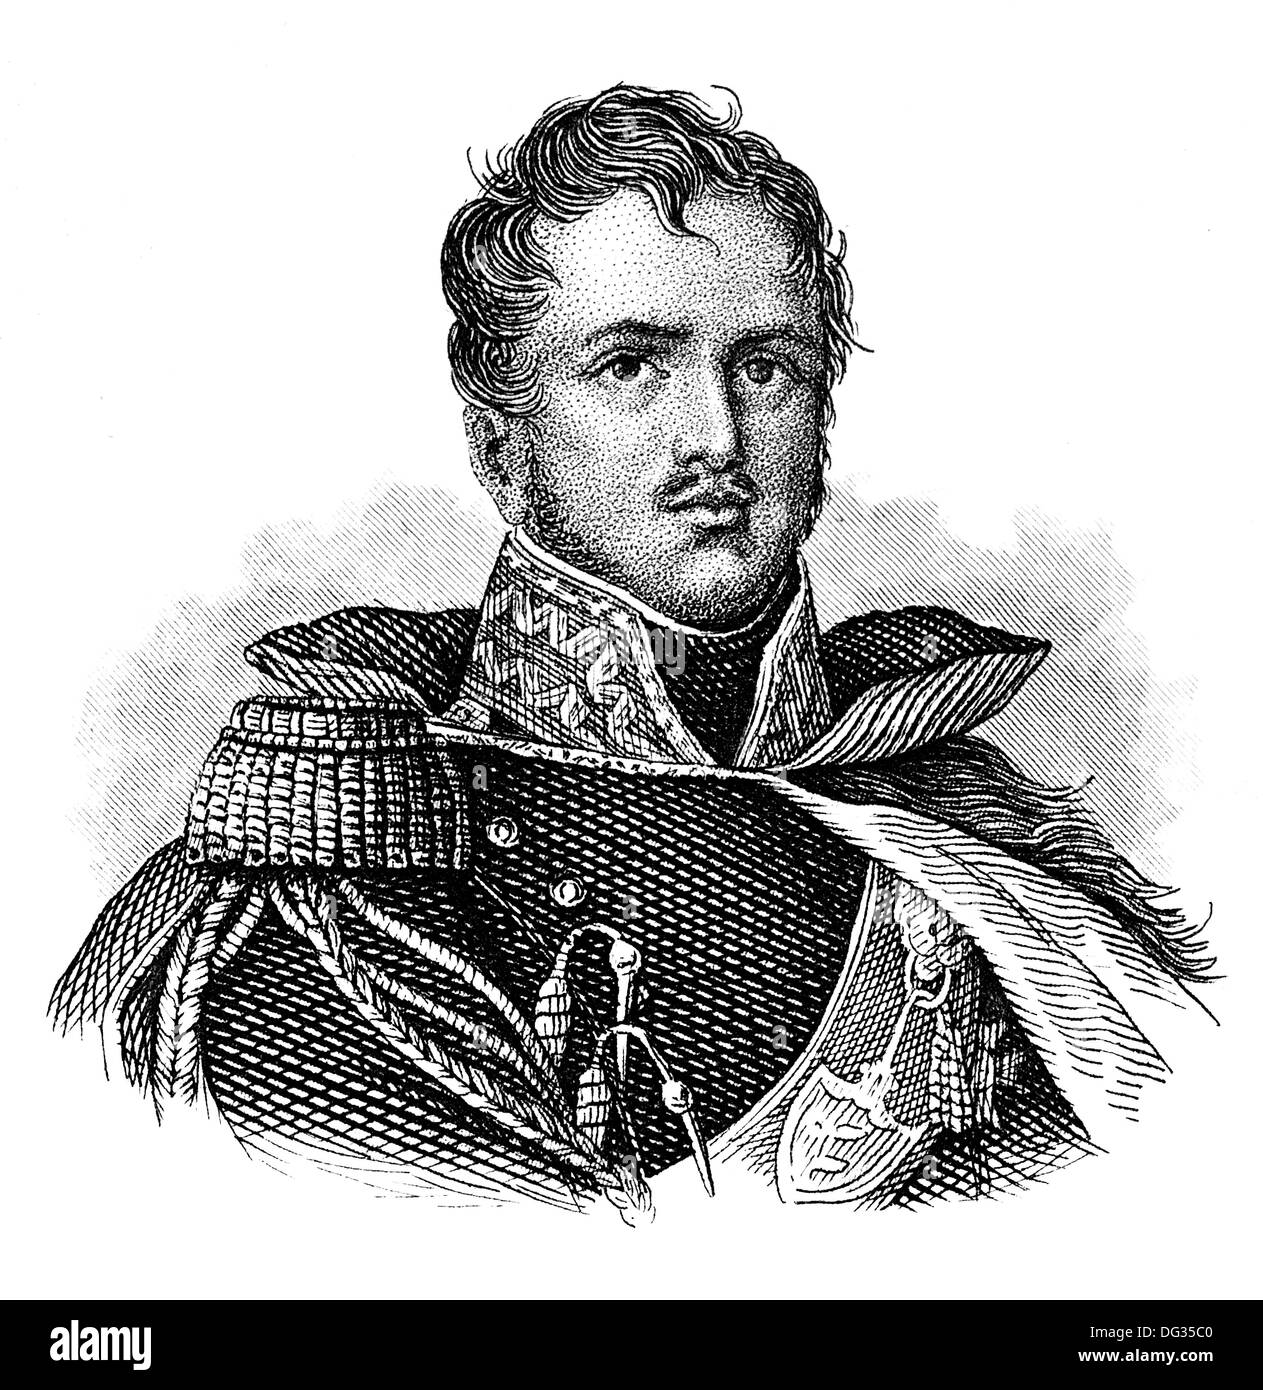 Prince Józef Antoni Poniatowski, 1763-1813, a Polish leader, general, minister of war and army chief, Marshal of the Empire Stock Photo